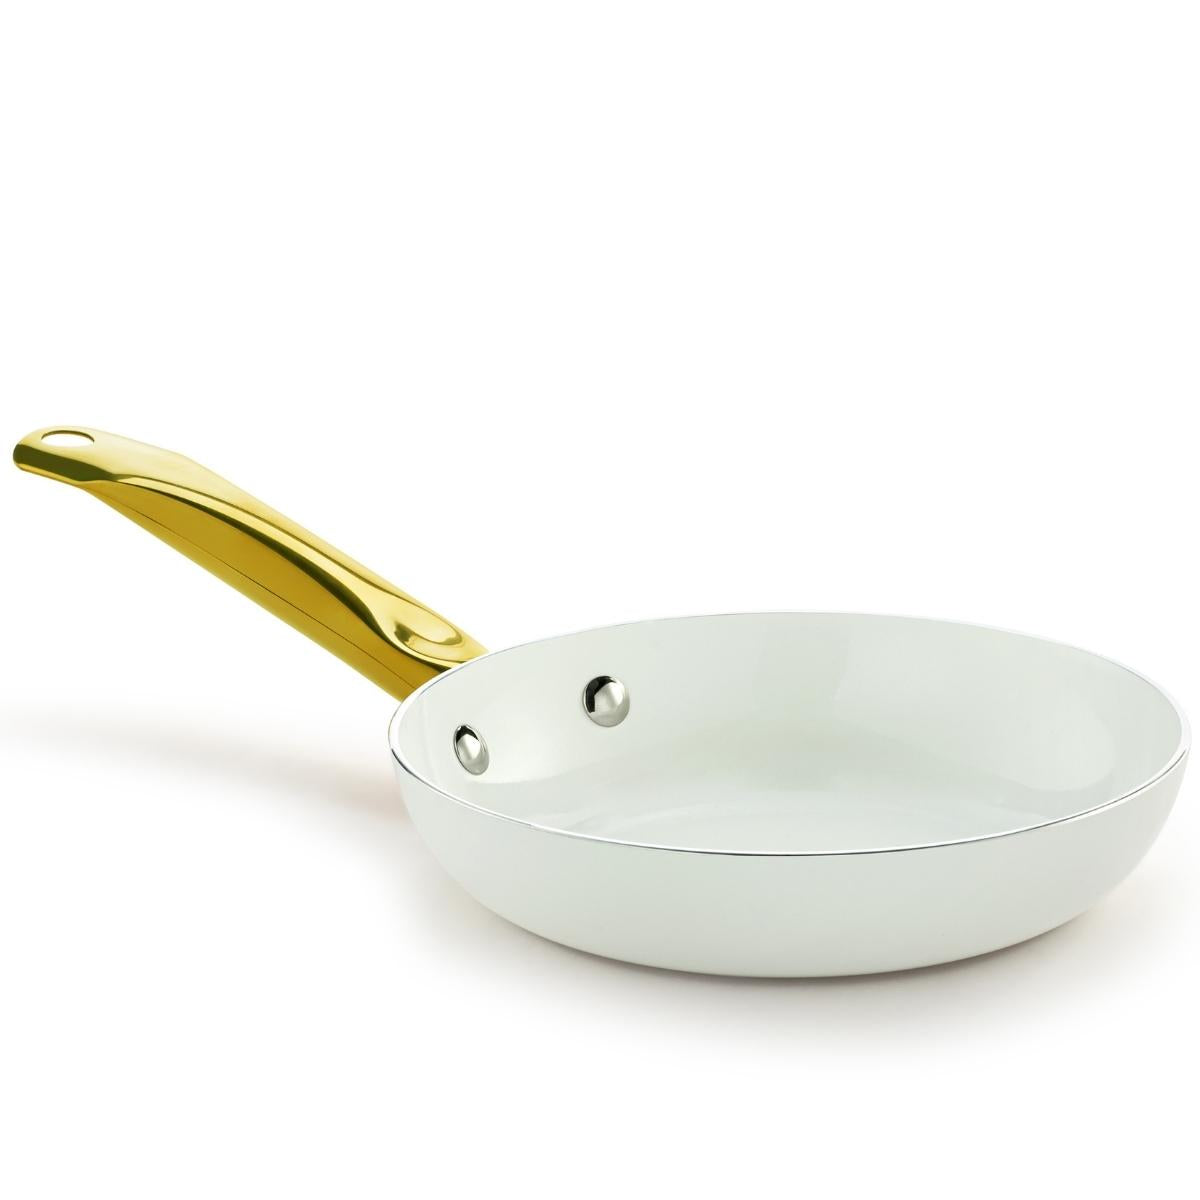 10-INCH CERAMIC NONSTICK FRY PAN WHITE & GOLD COLOR